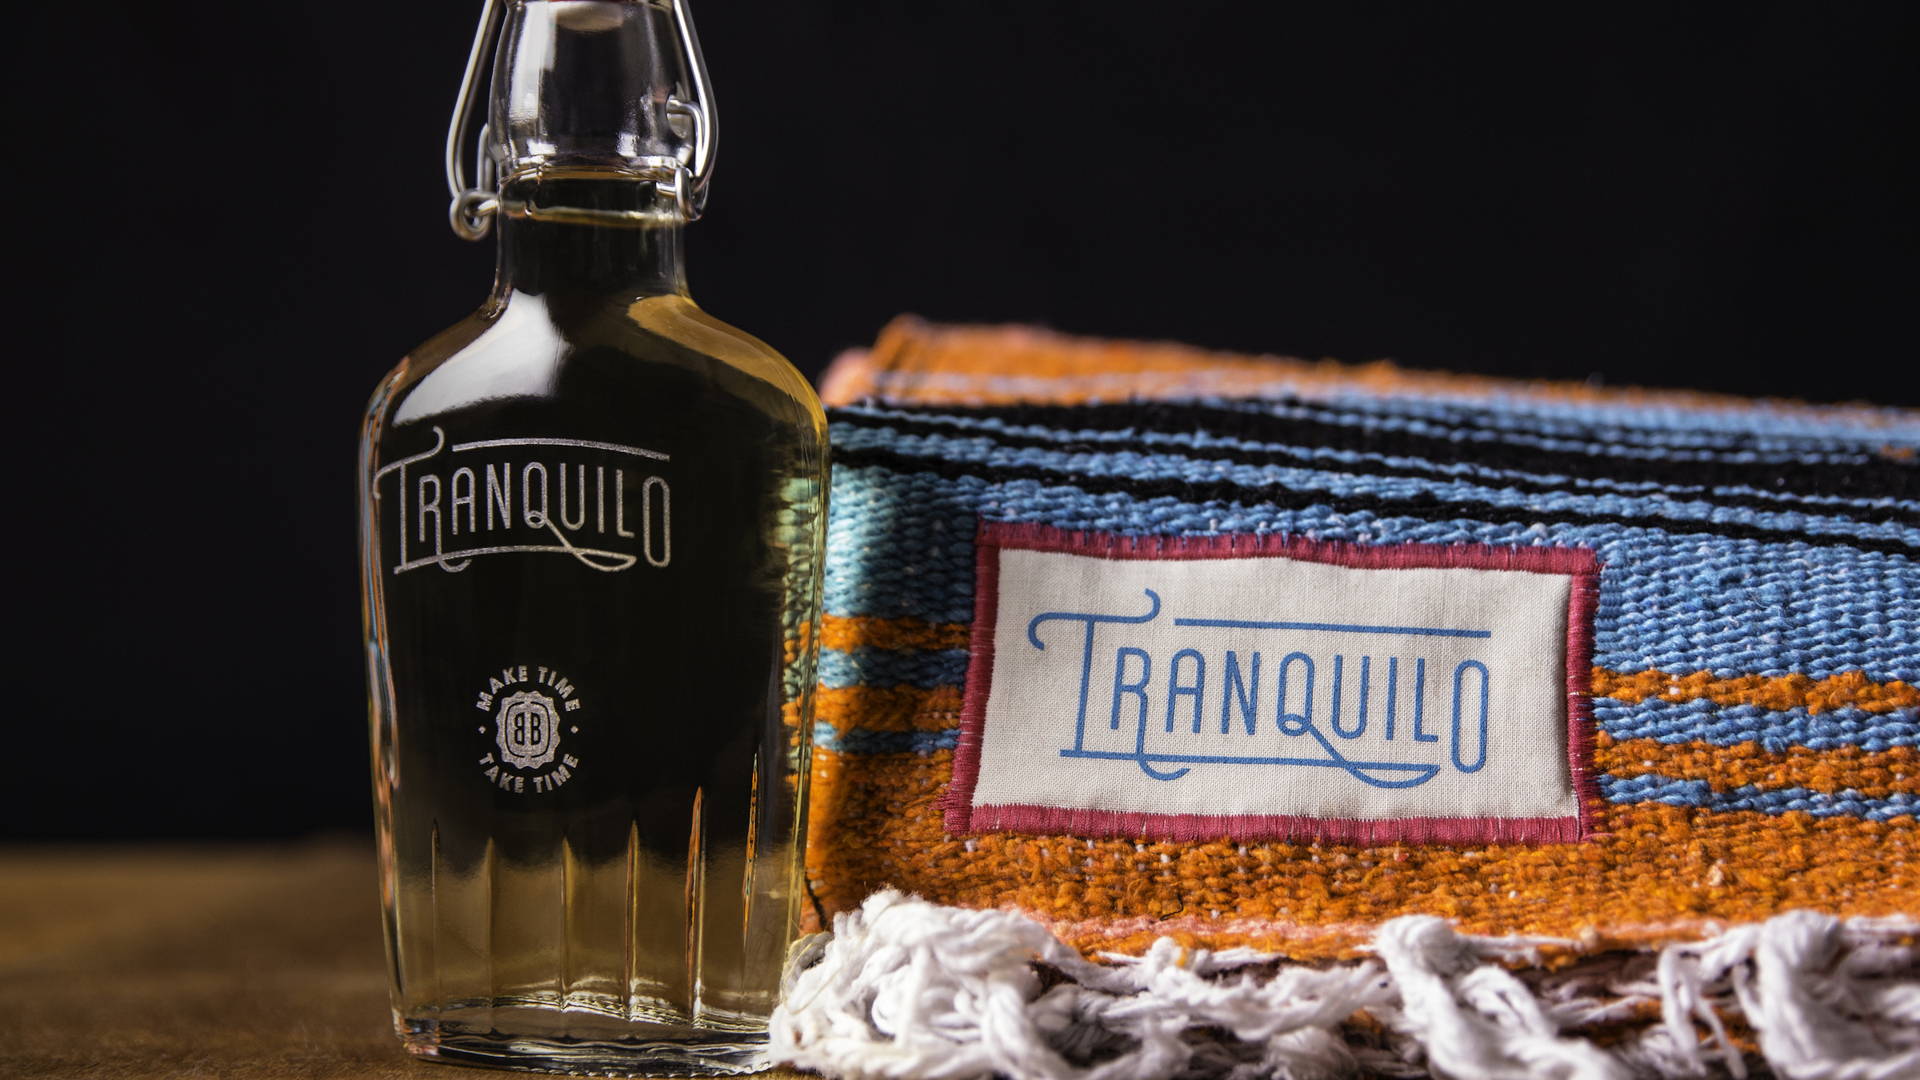 Featured image for Take the Edge off with this Thoughtful Tranquilo Tequila Gift Set